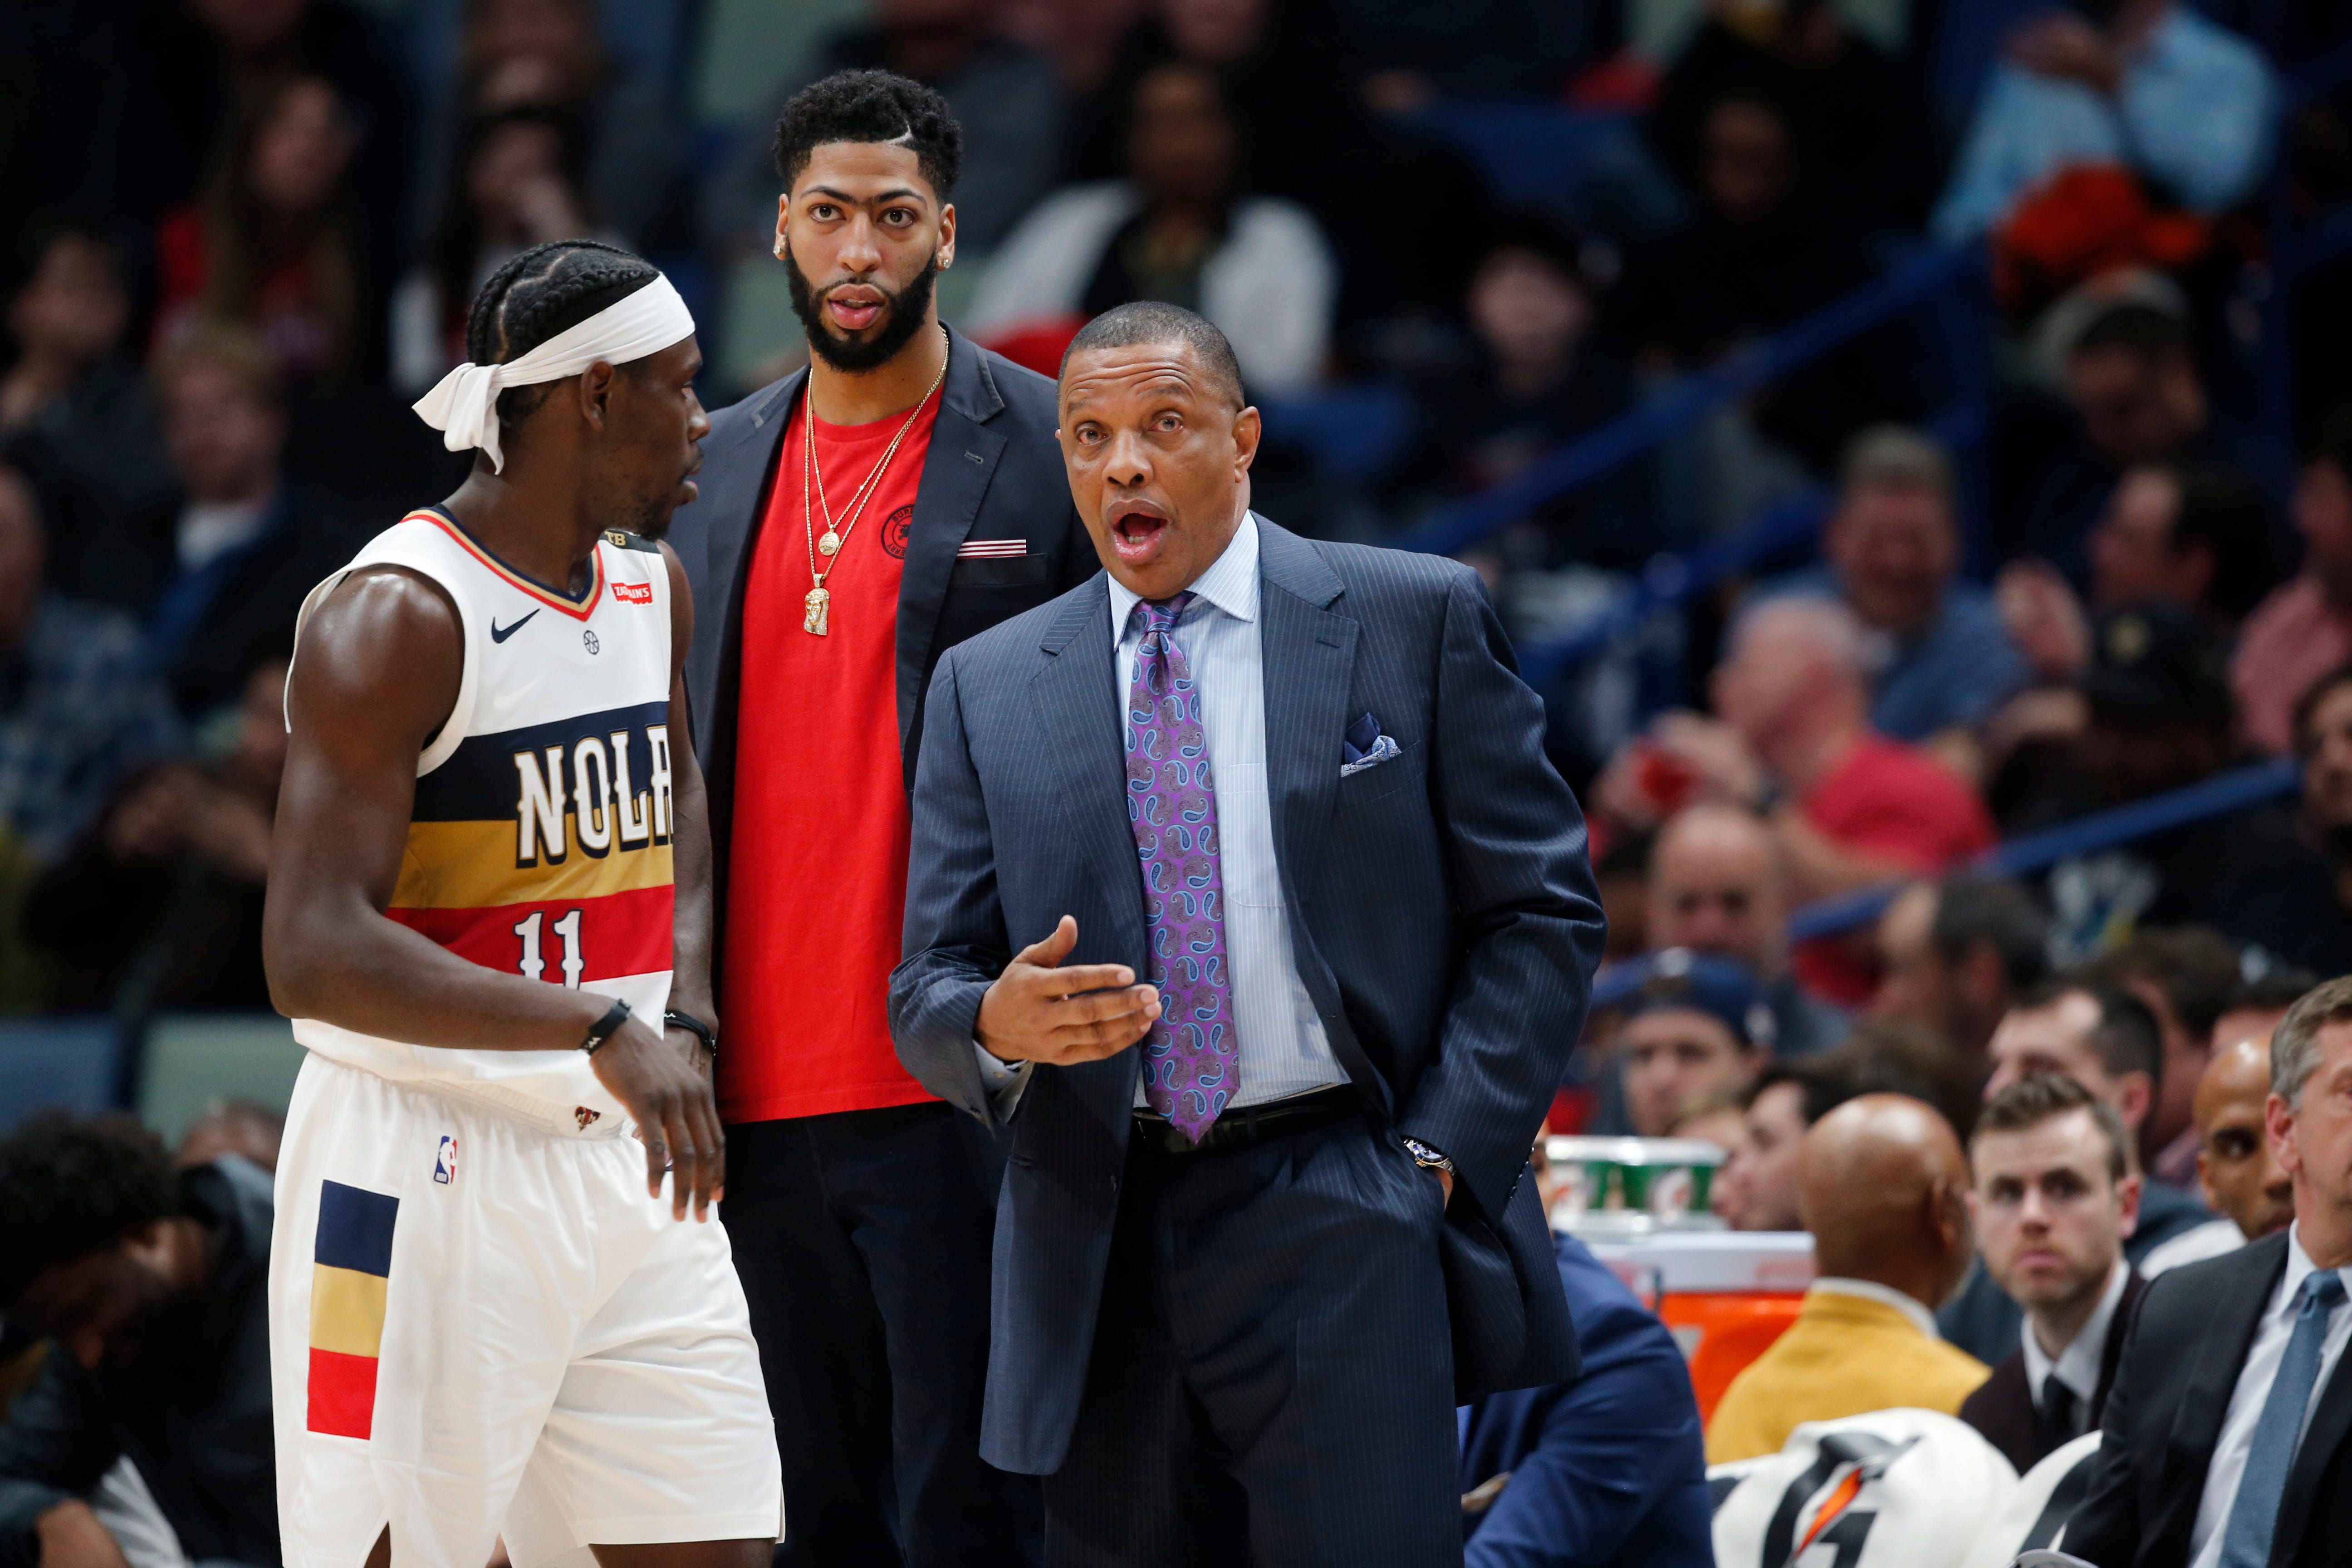 New Orleans Pelicans head coach Alvin Gentry talks to guard Jrue Holiday (11) and New Orleans Pelicans forward Anthony Davis, in street clothes due to an injury, in the second half of an NBA basketball game against the Detroit Pistons in New Orleans, Wednesday, Jan. 23, 2019. The Pistons won 98-94.